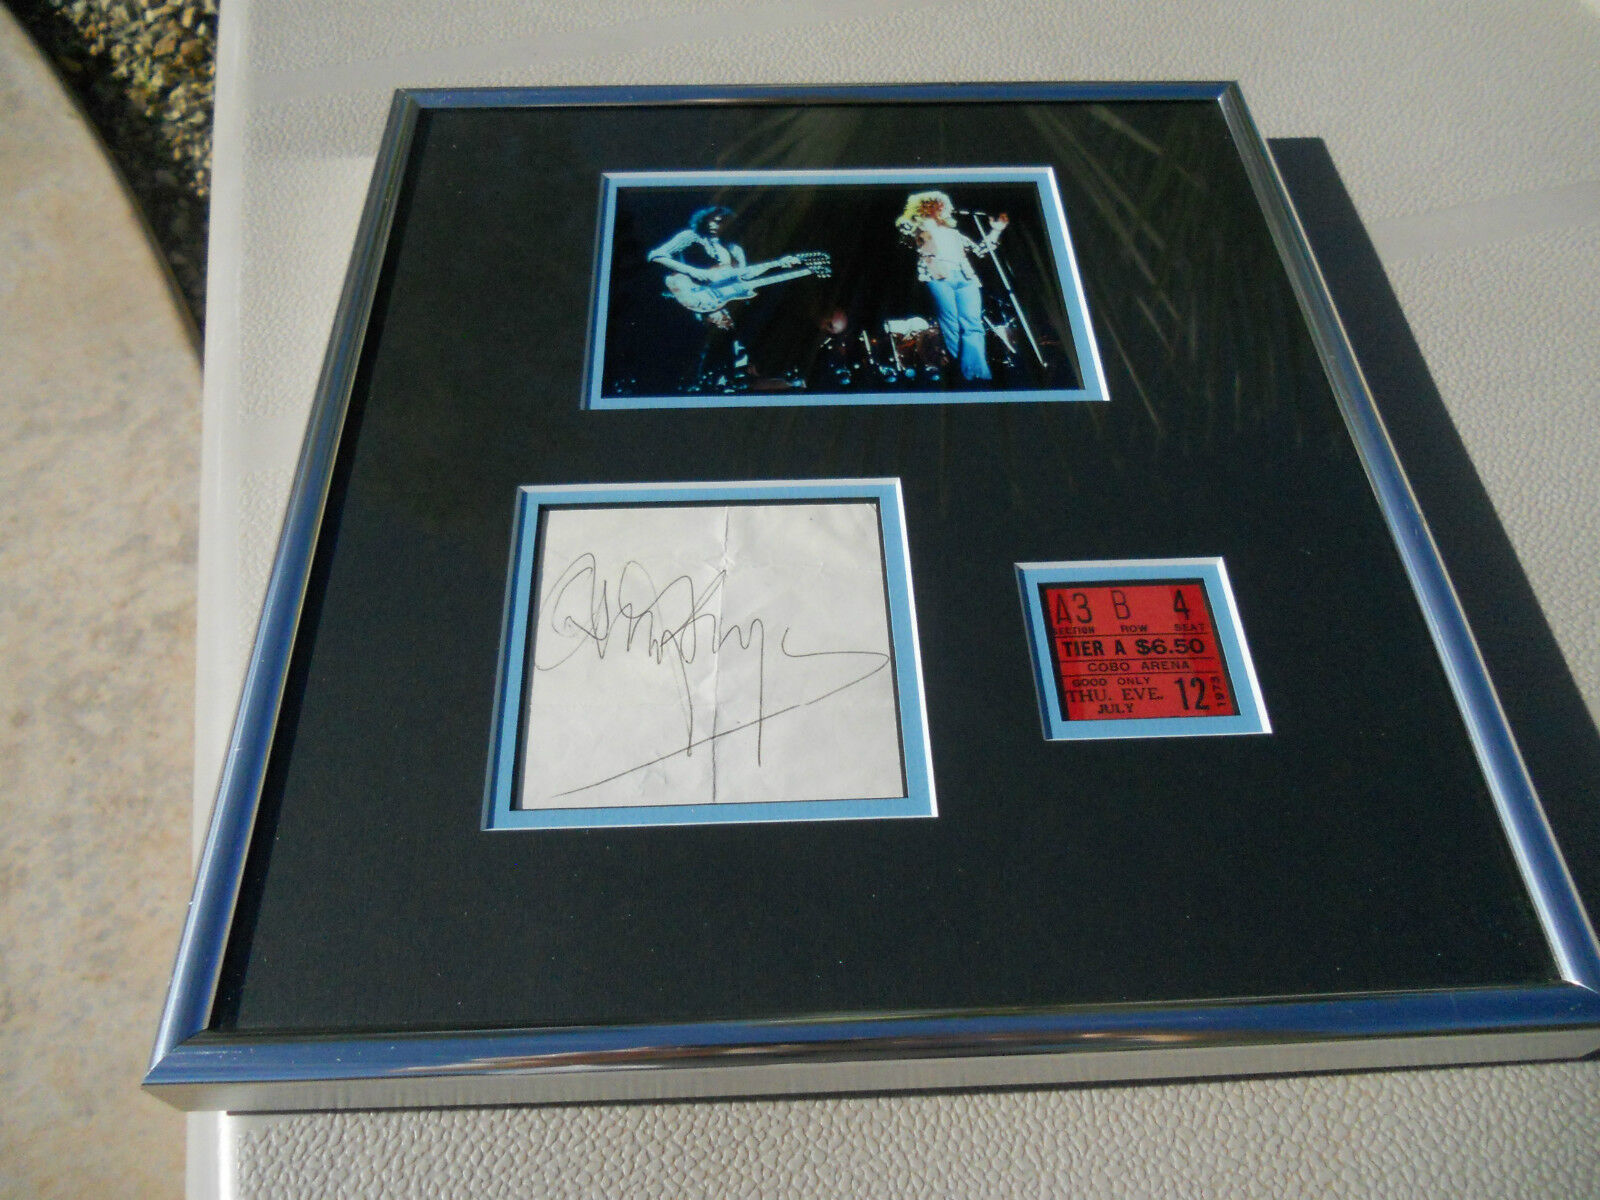 Jimmy Page Led Zeppelin 1973 Signed Cut Framed W Ticket & Photo Poster painting PSA Certified